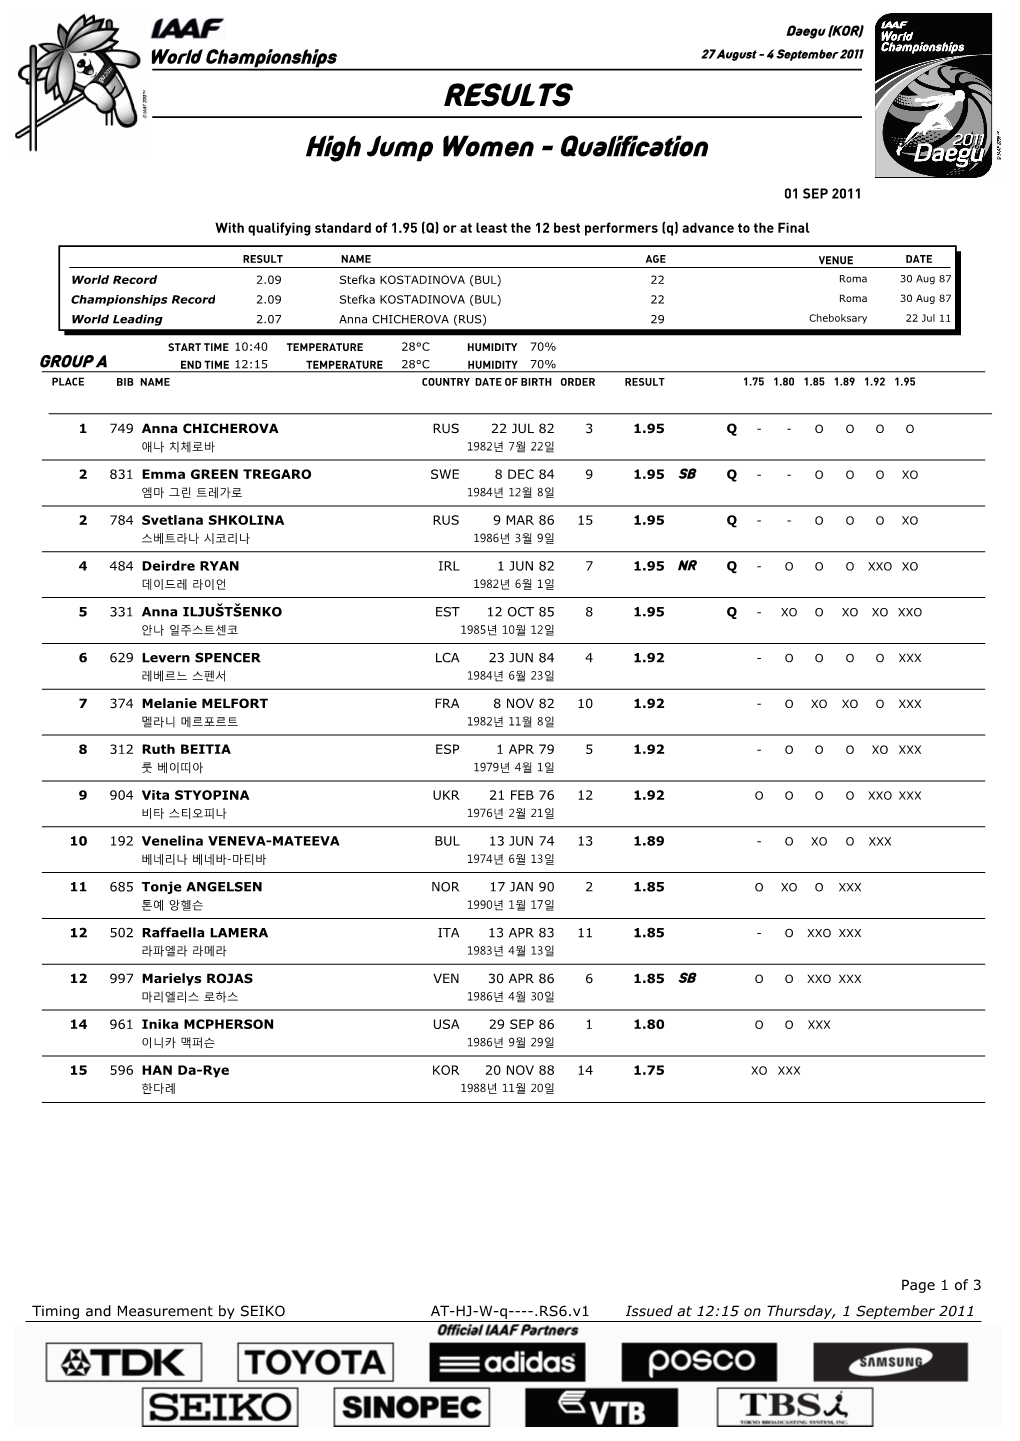 RESULTS High Jump Women - Qualification